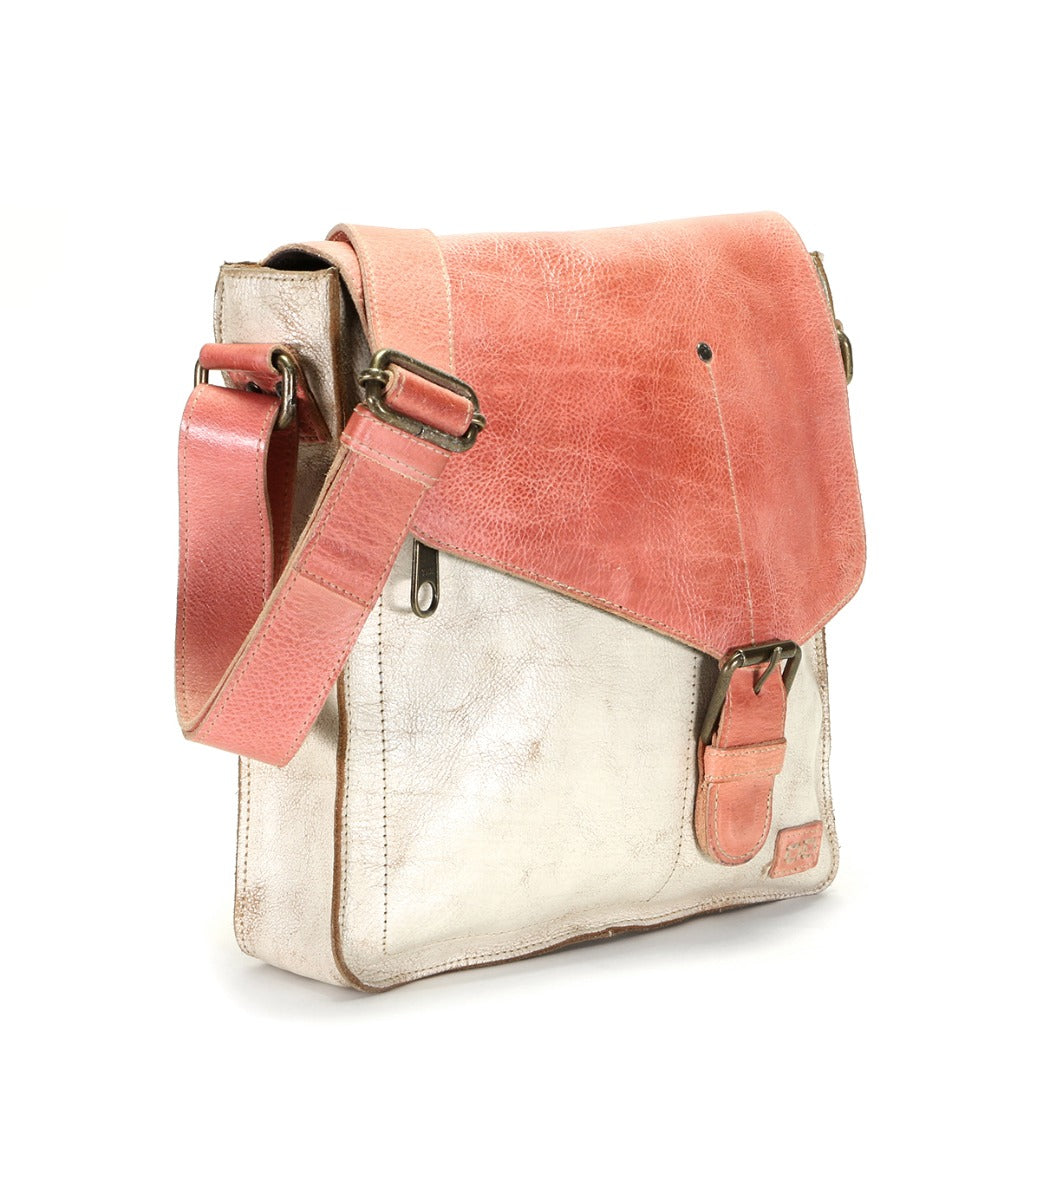 A pink and white leather Bed Stu Venice Beach messenger bag.